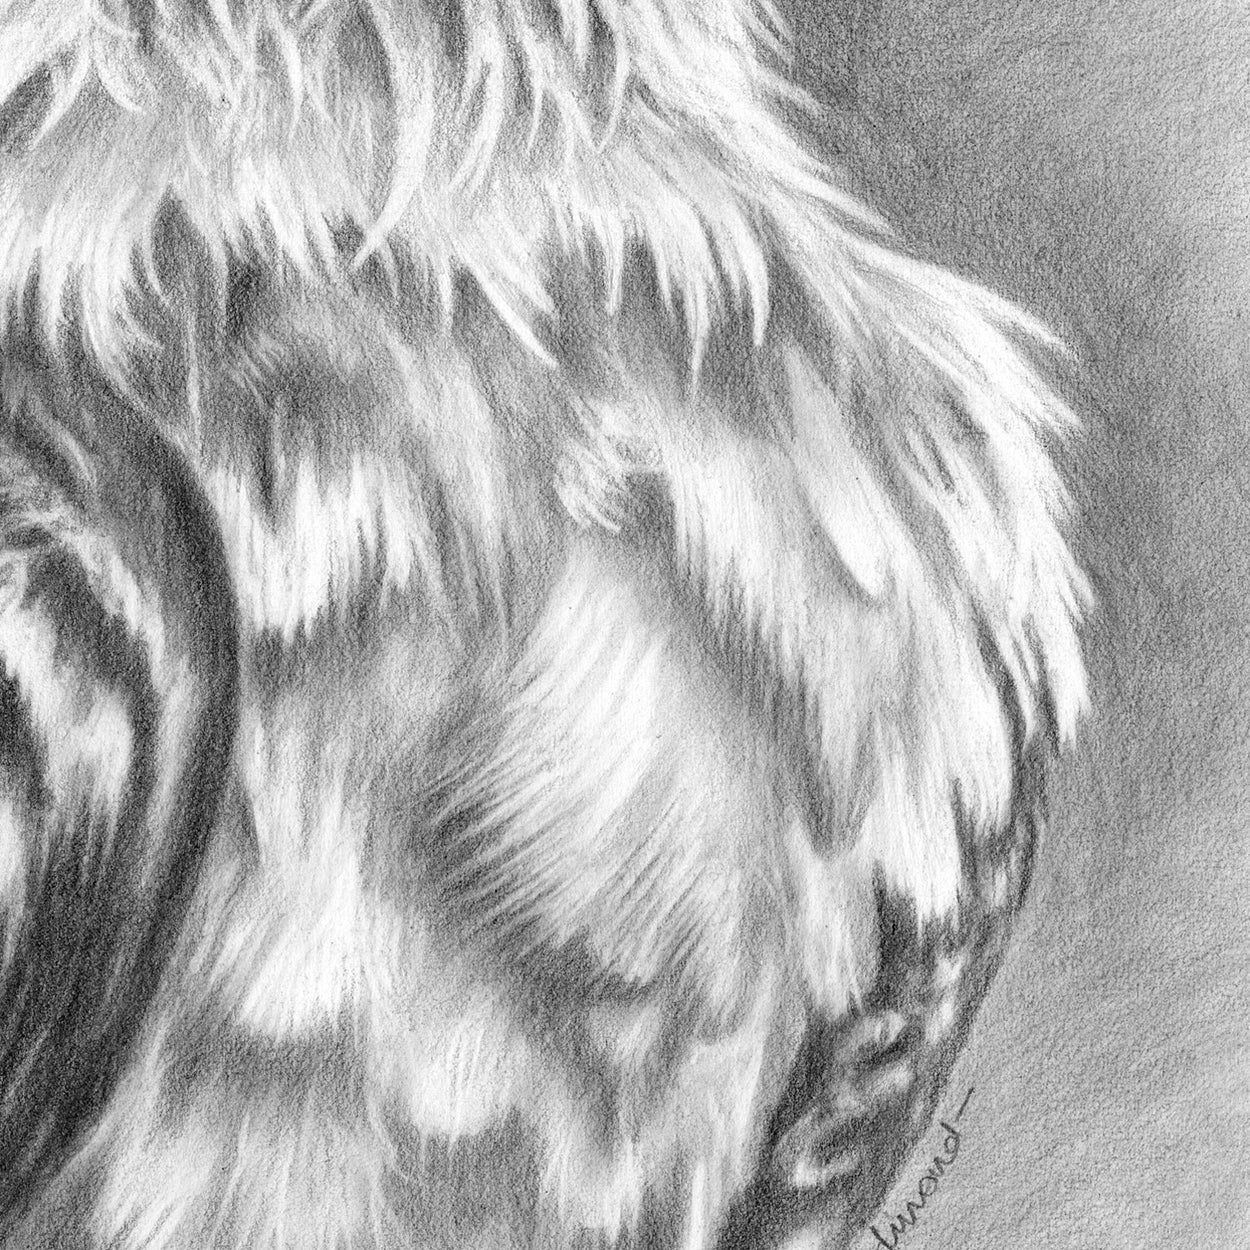 Bearded Vulture Drawing Close-up 3 - The Thriving Wild - Jill Dimond